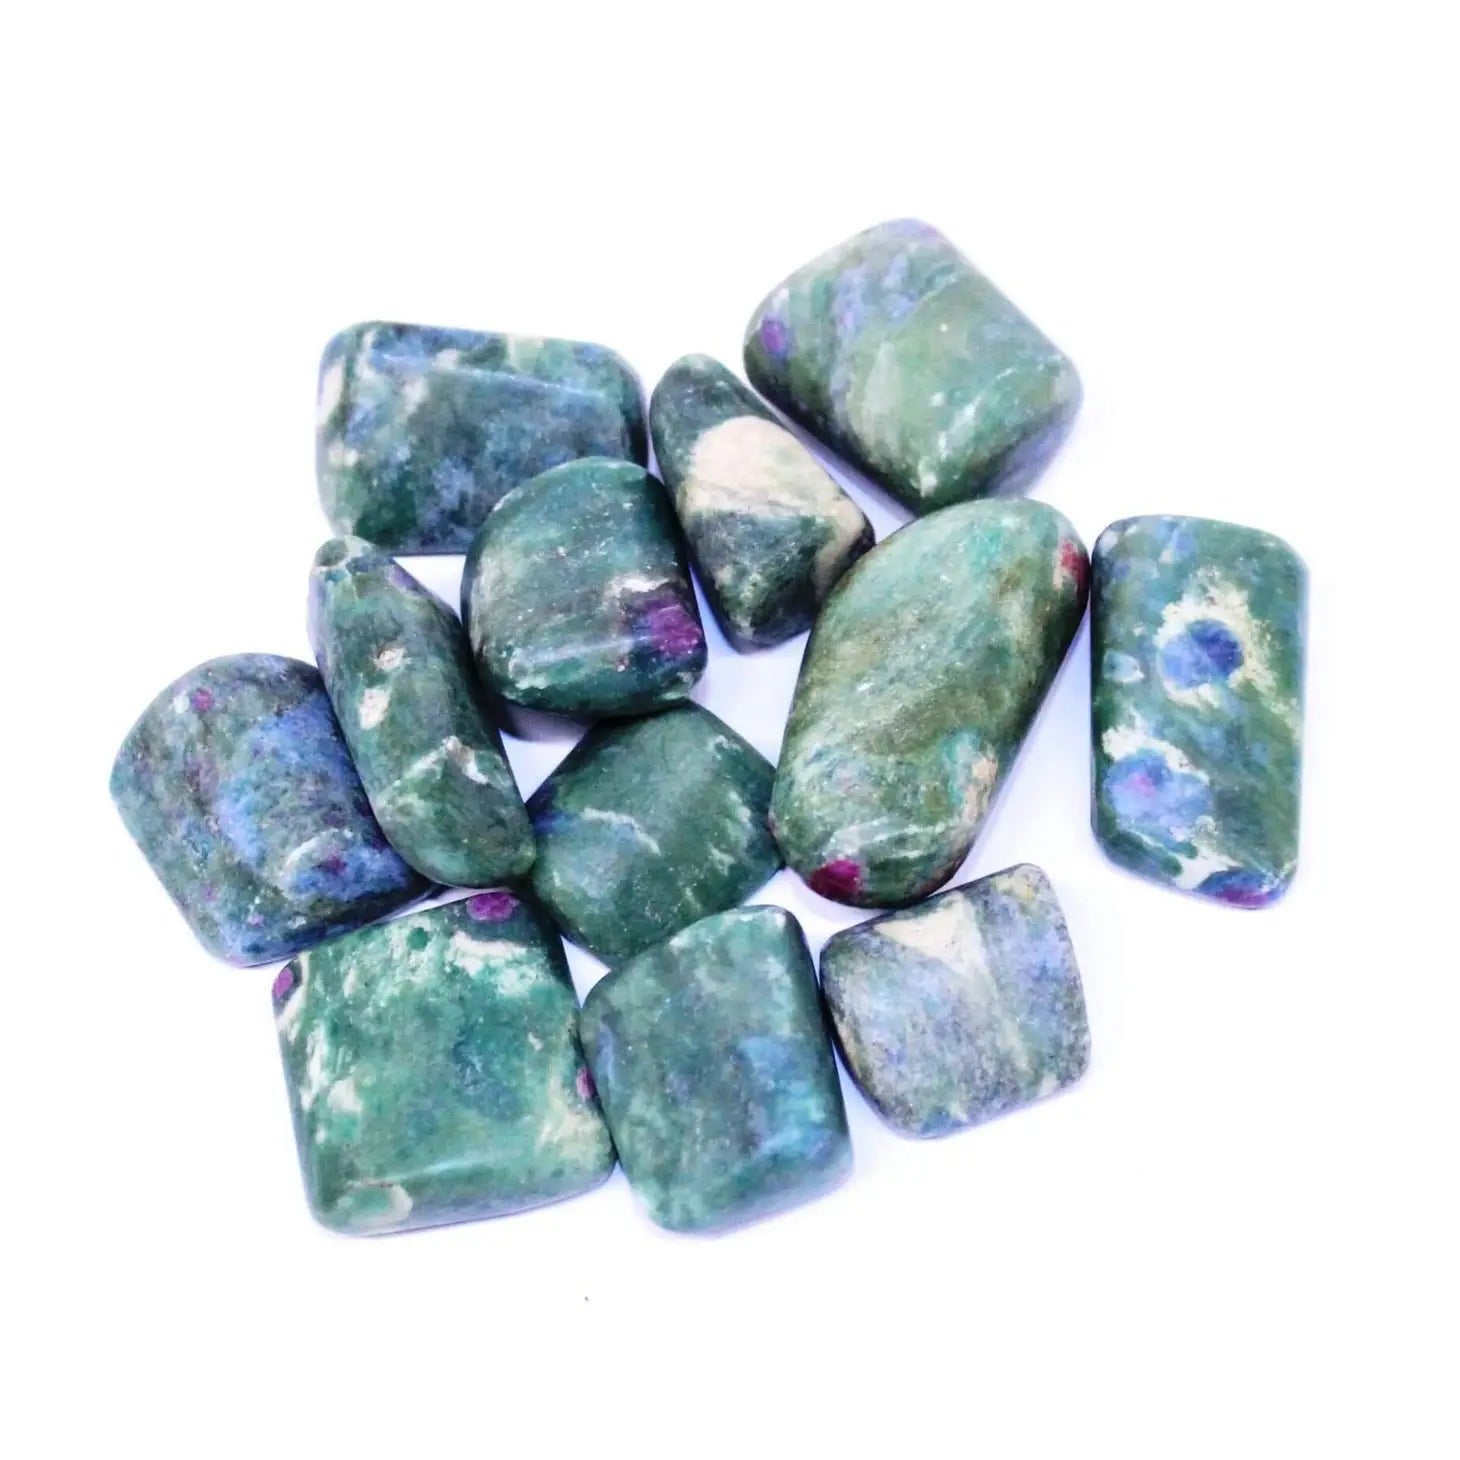 Ruby in Fuchsite Polished Tumblestone Healing Crystals - serenities